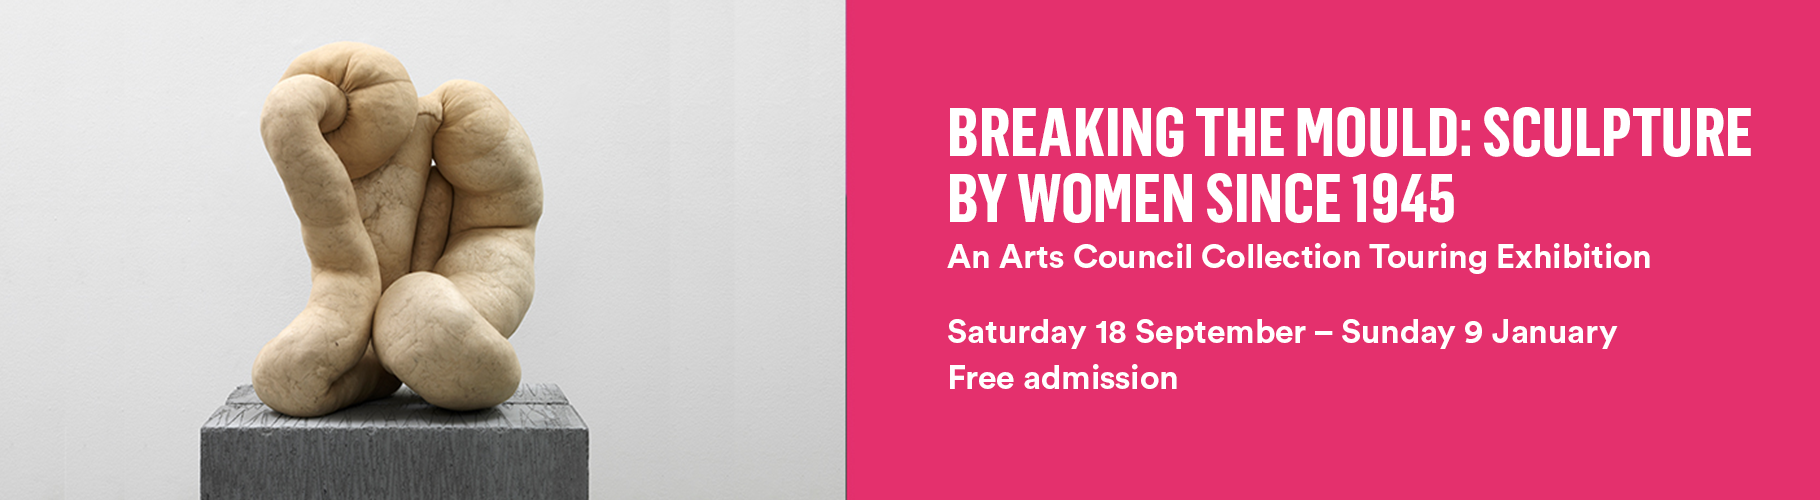 Breaking the Mould Event information. September 18 September - Sunday 9 January; Free admission